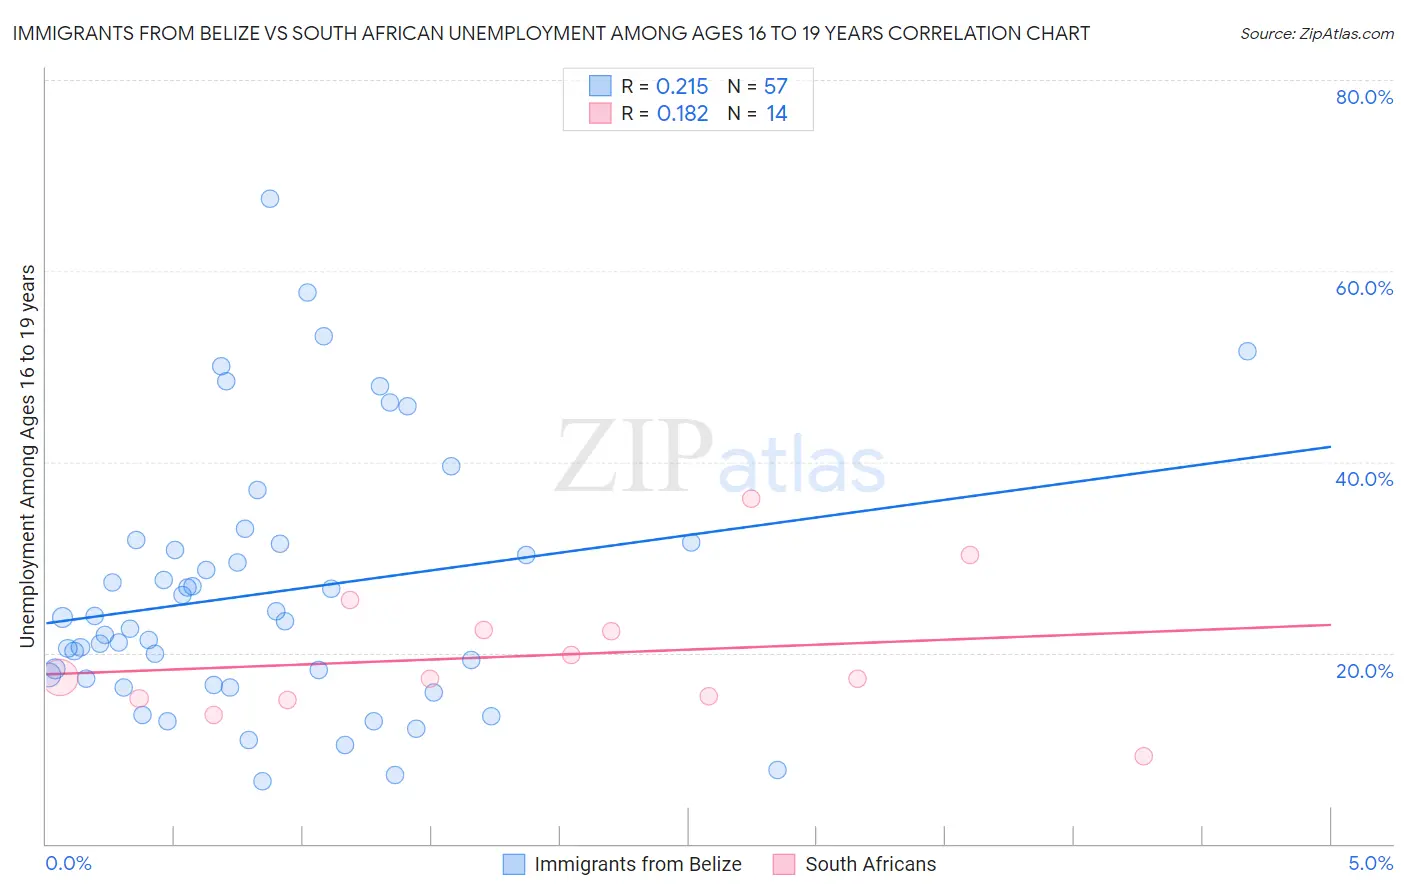 Immigrants from Belize vs South African Unemployment Among Ages 16 to 19 years